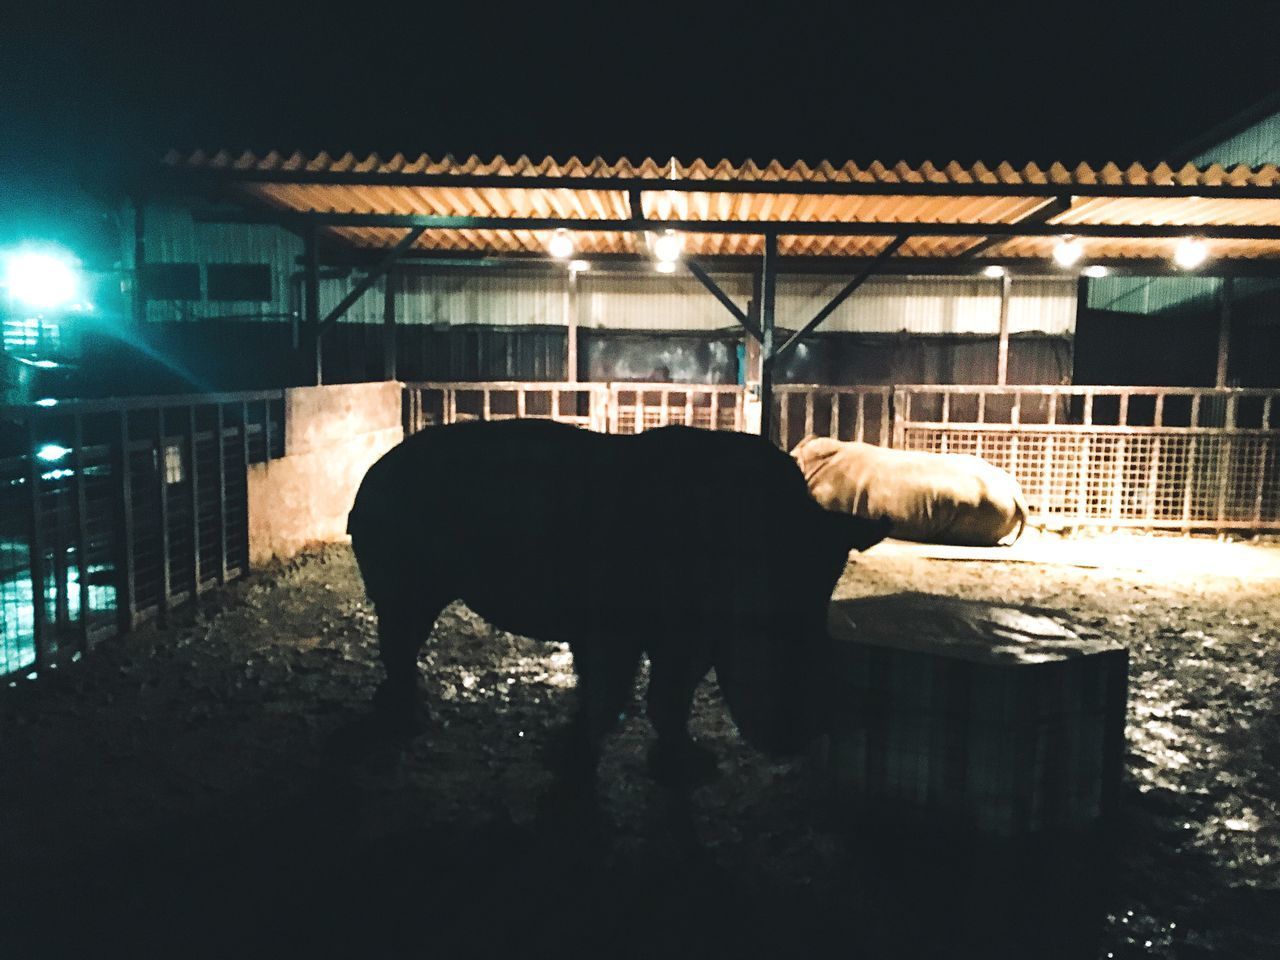 HORSE STANDING IN STABLE AT NIGHT